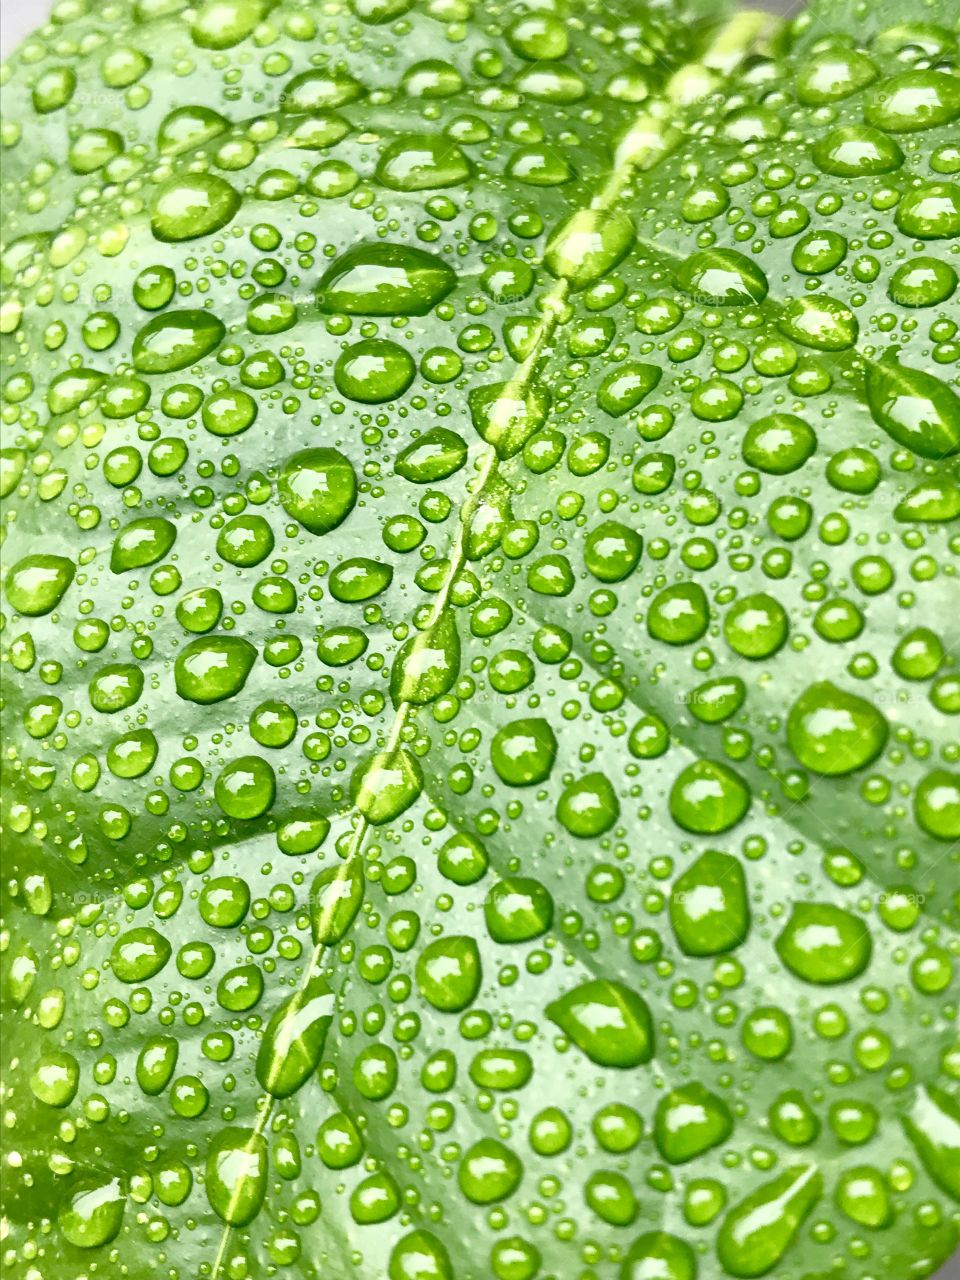 Citrus leaf with water droplets 